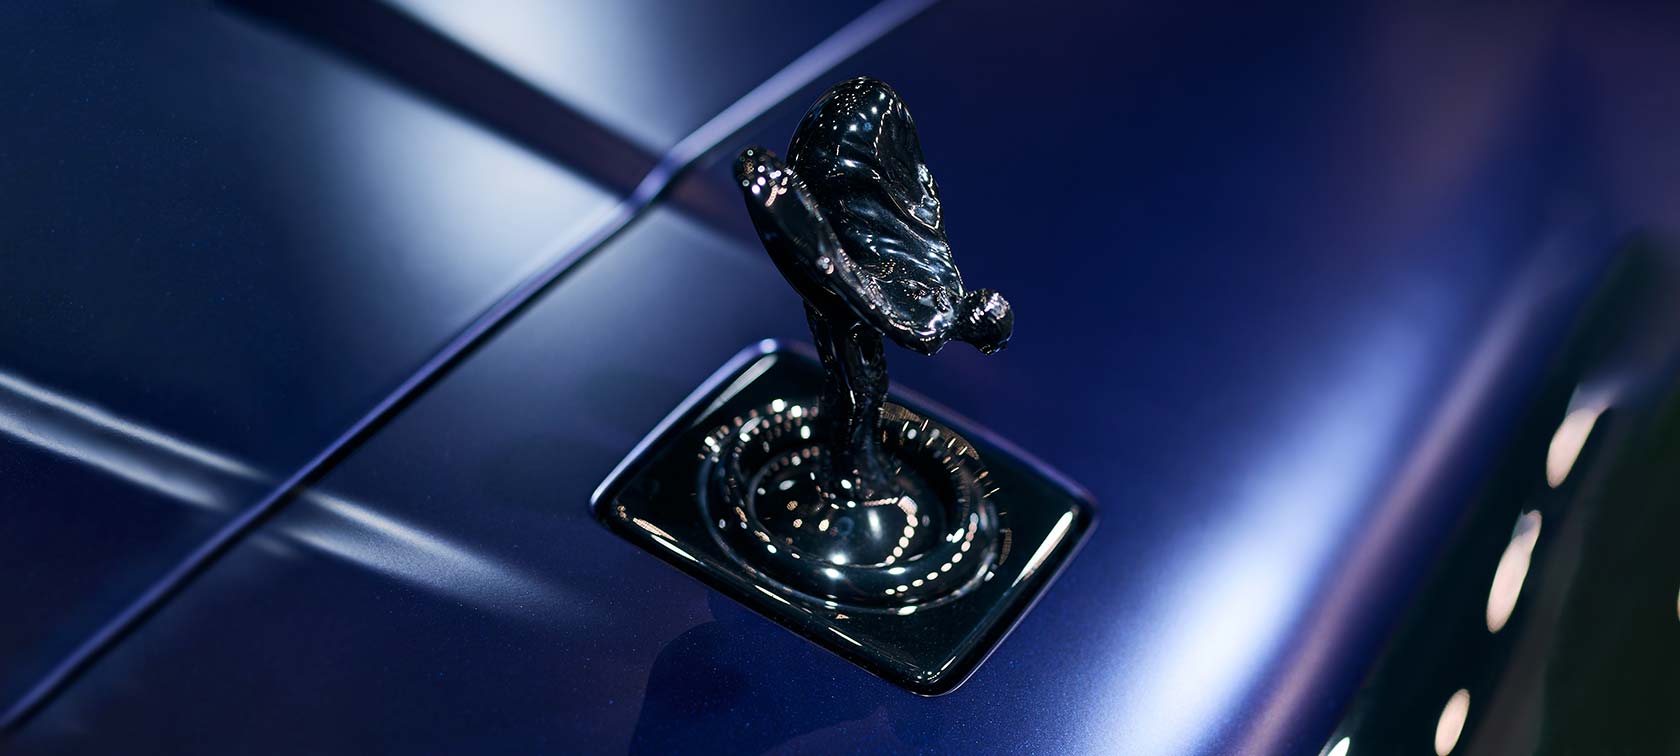 How much does a Rolls Royce Emblem cost  Quora